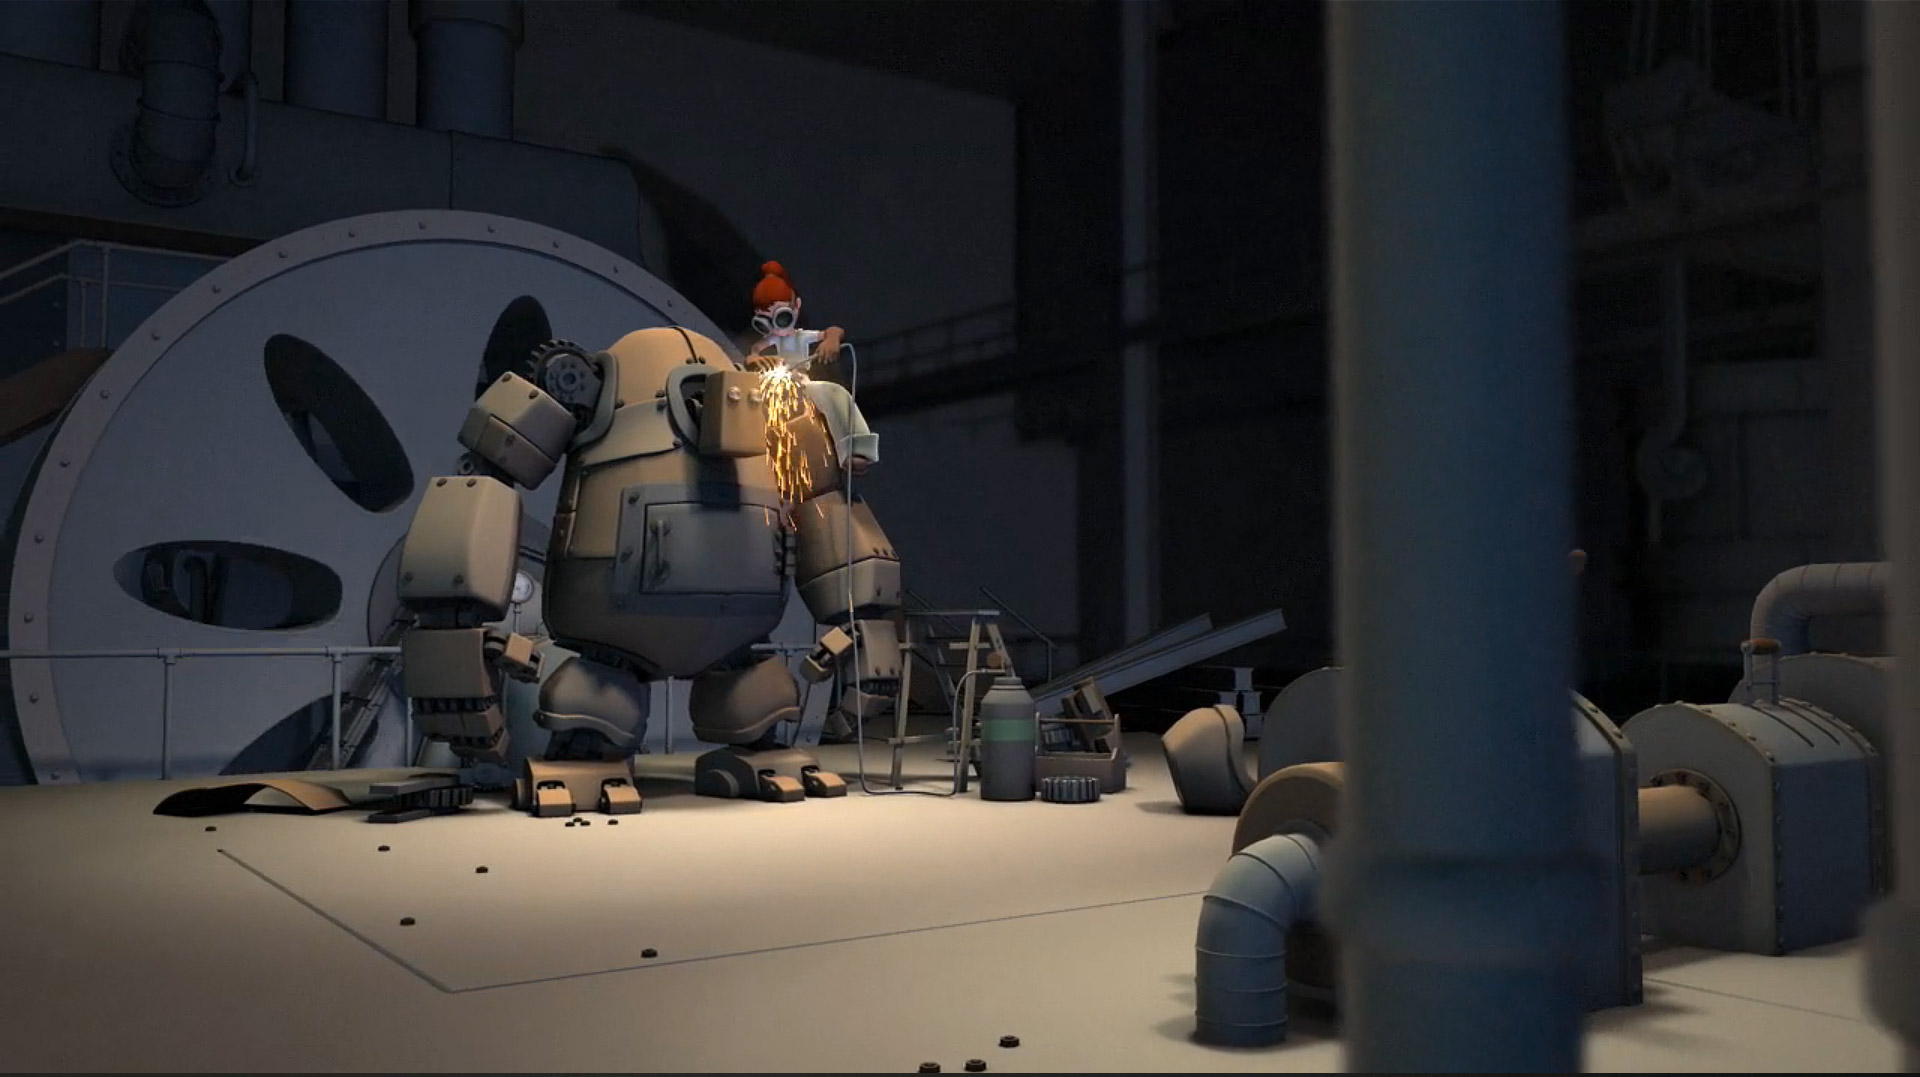 charming-animated-short-about-a-girl-and-her-robot-11.jpg